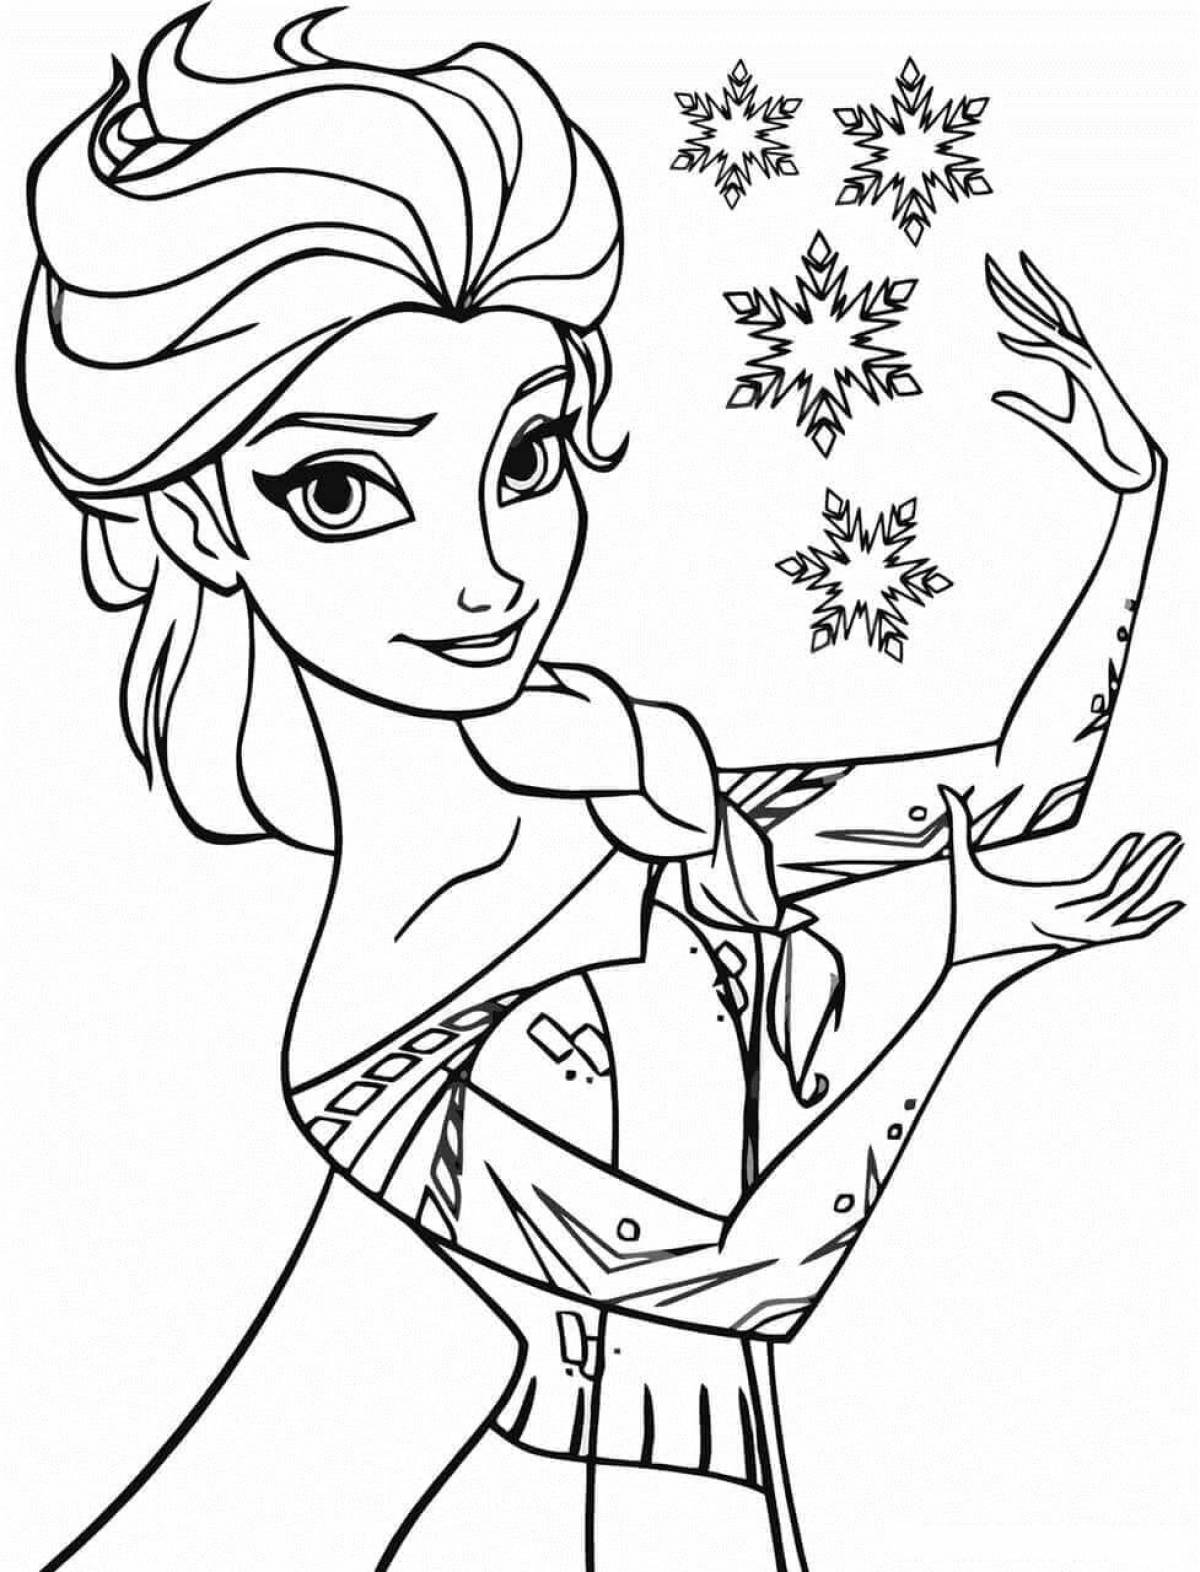 Coloring pages elsa and anna for kids